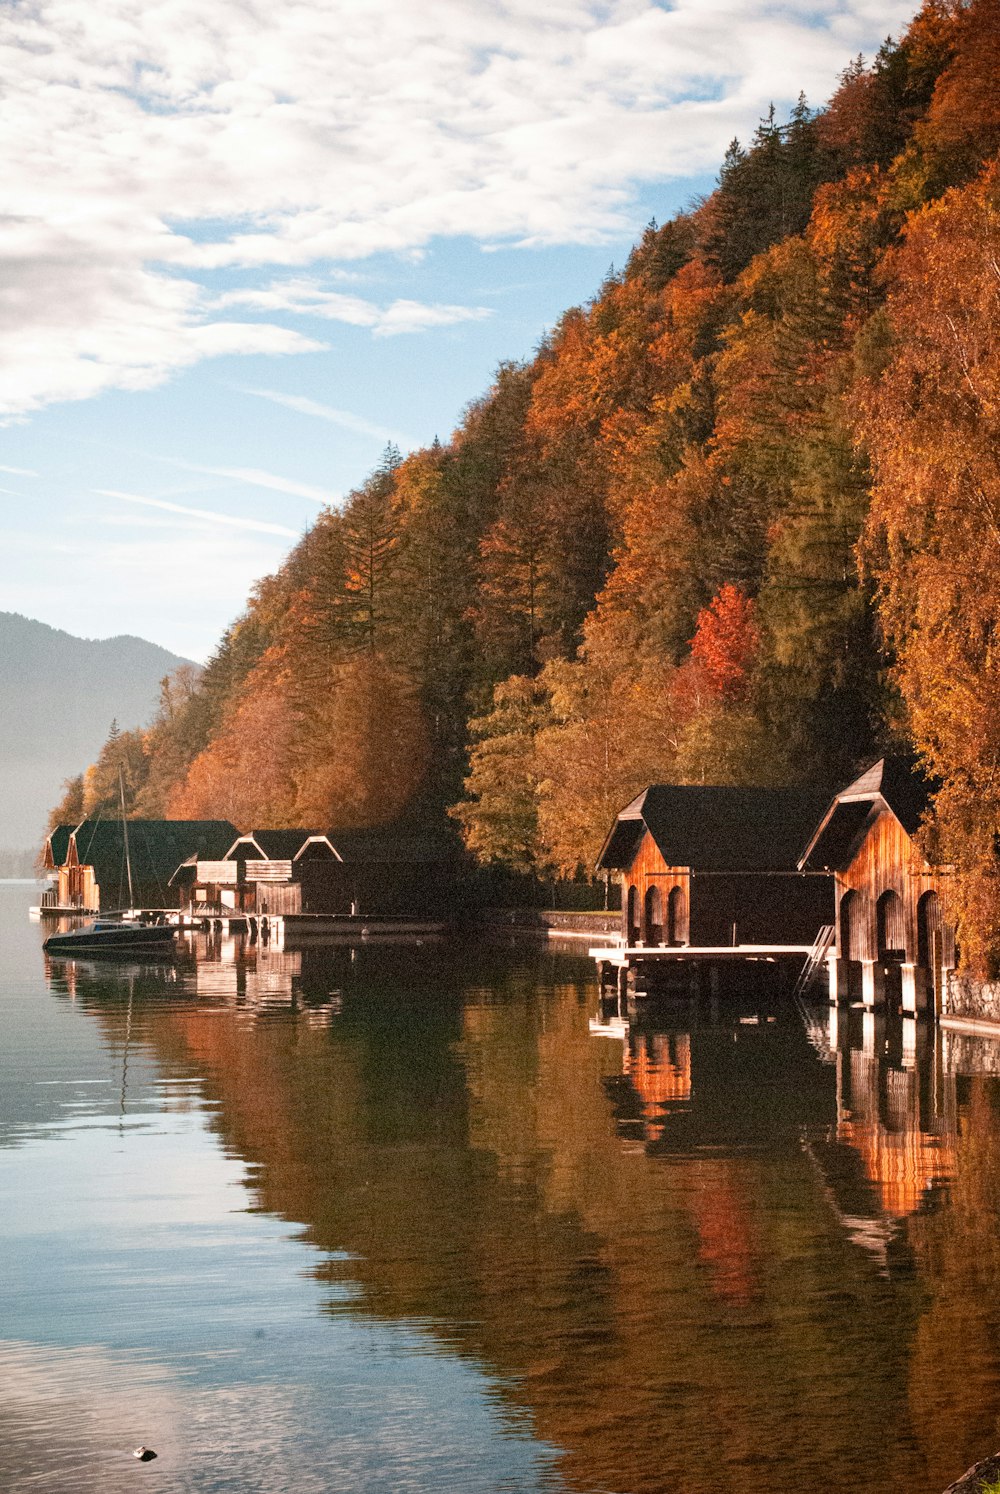 a house on a dock by a lake with trees and mountains in the background